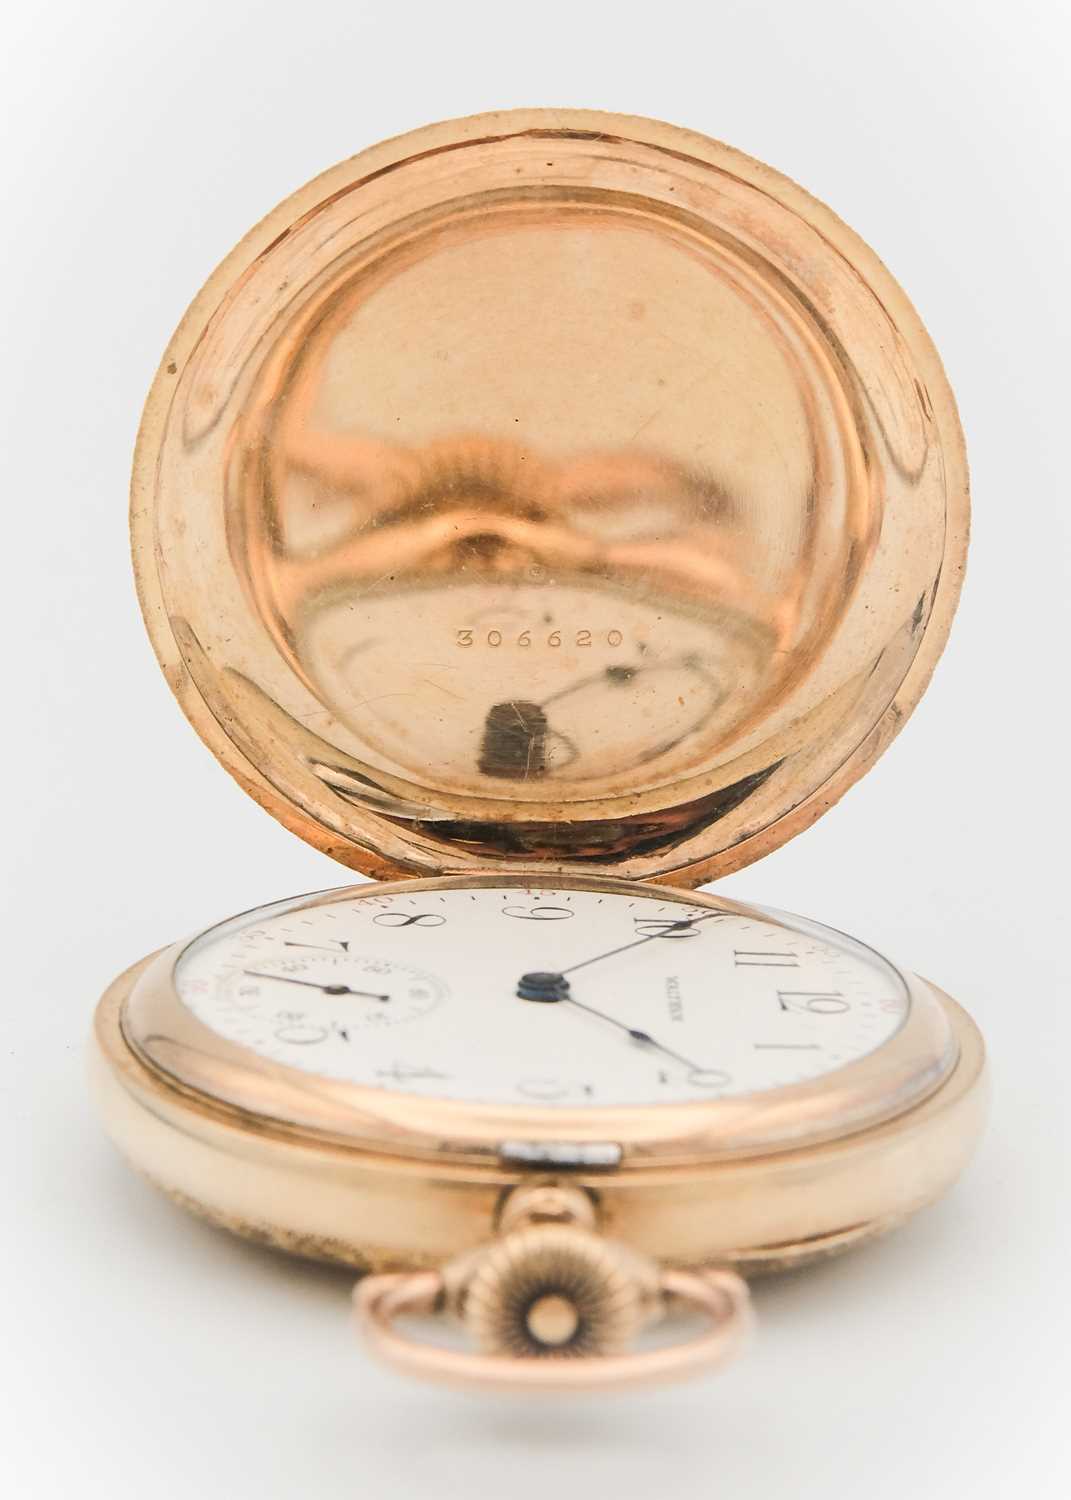 WALTHAM - A gold-plated full hunter crown wind lever pocket watch. - Image 2 of 4